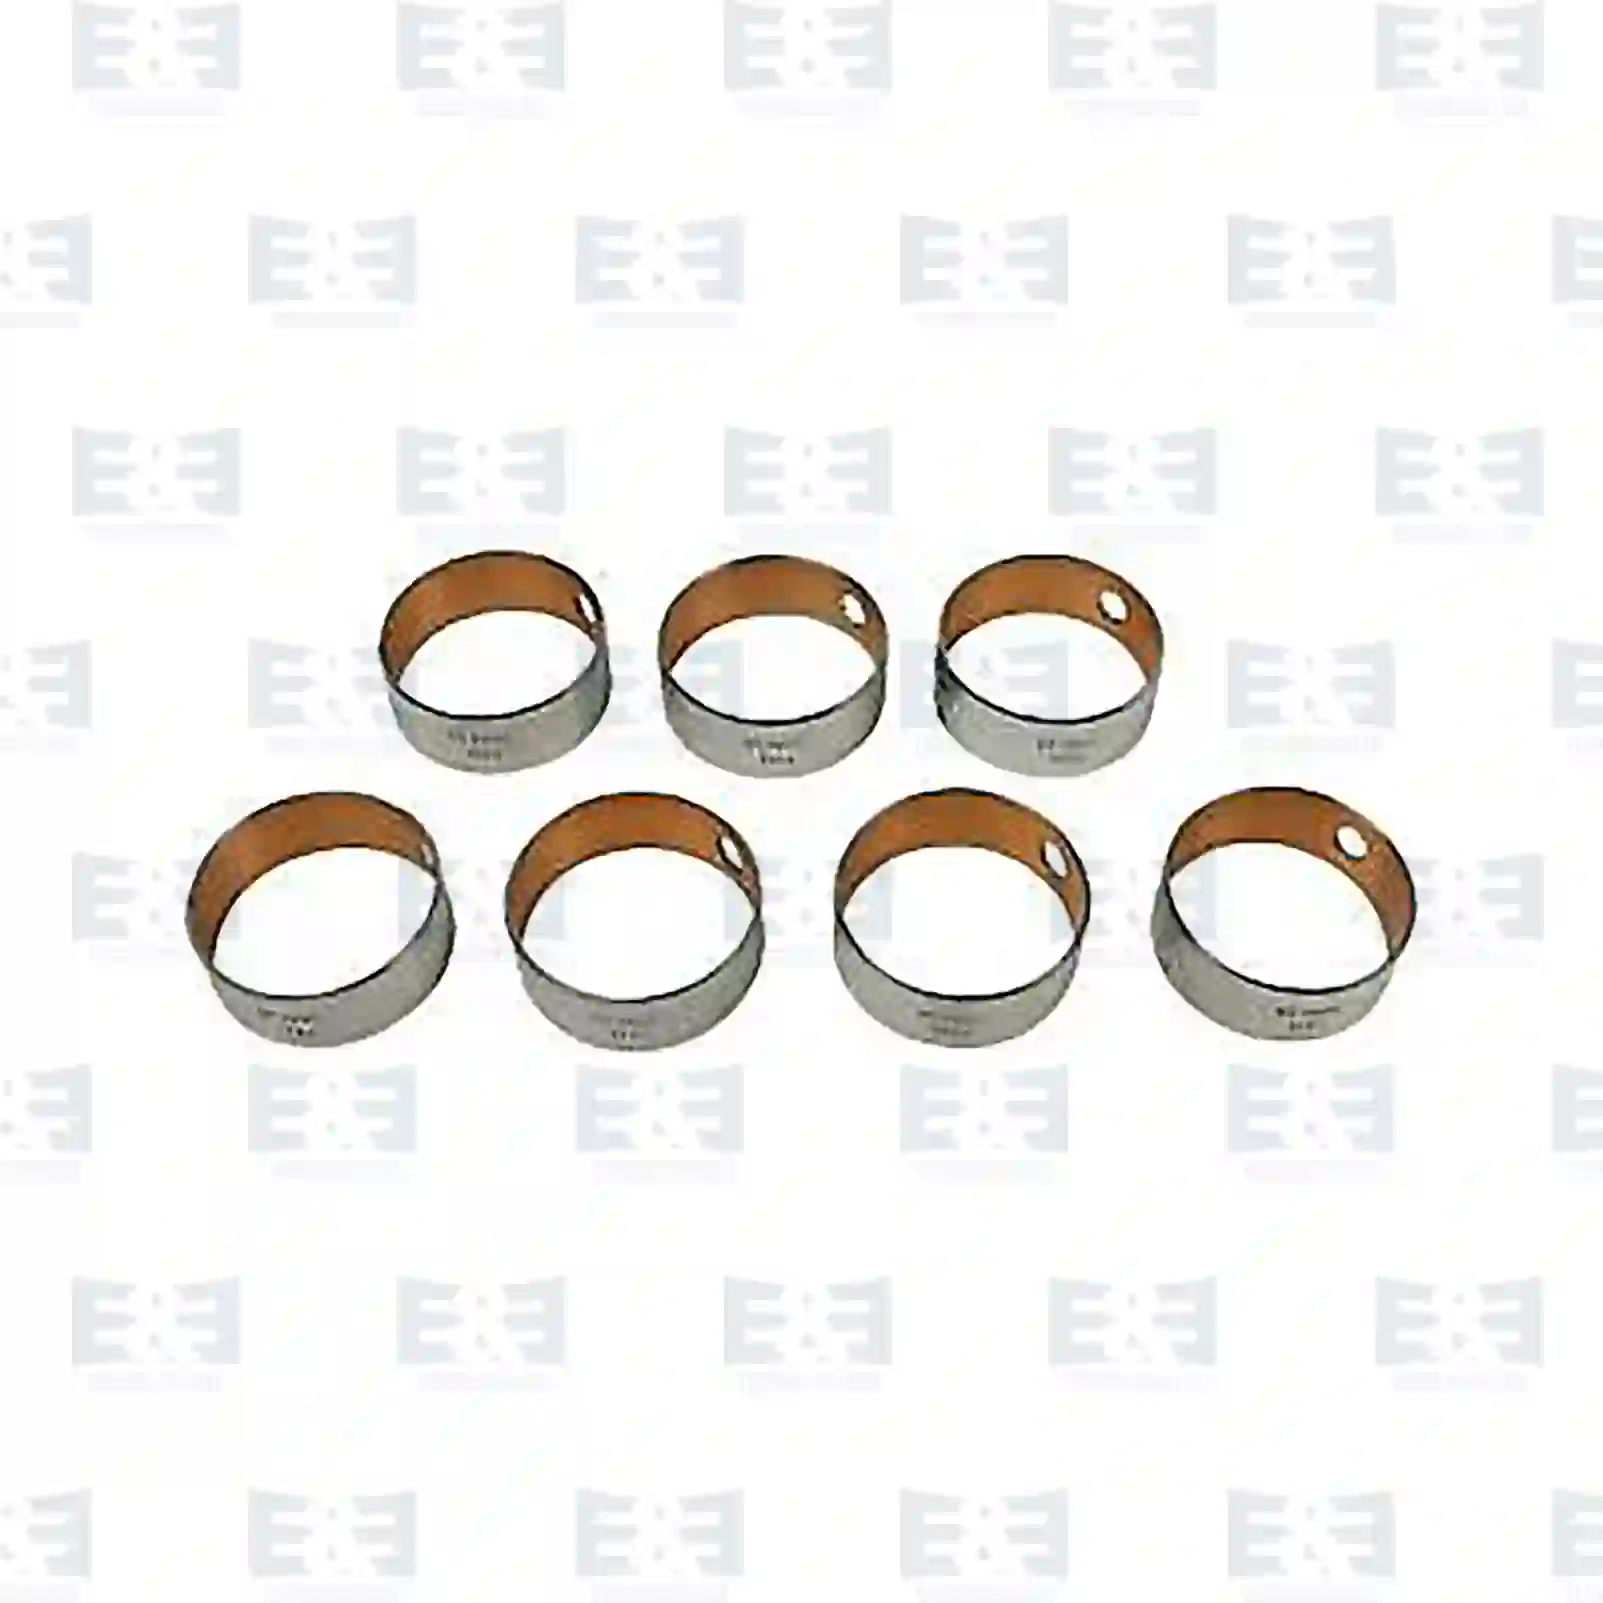  Camshaft bearing kit || E&E Truck Spare Parts | Truck Spare Parts, Auotomotive Spare Parts